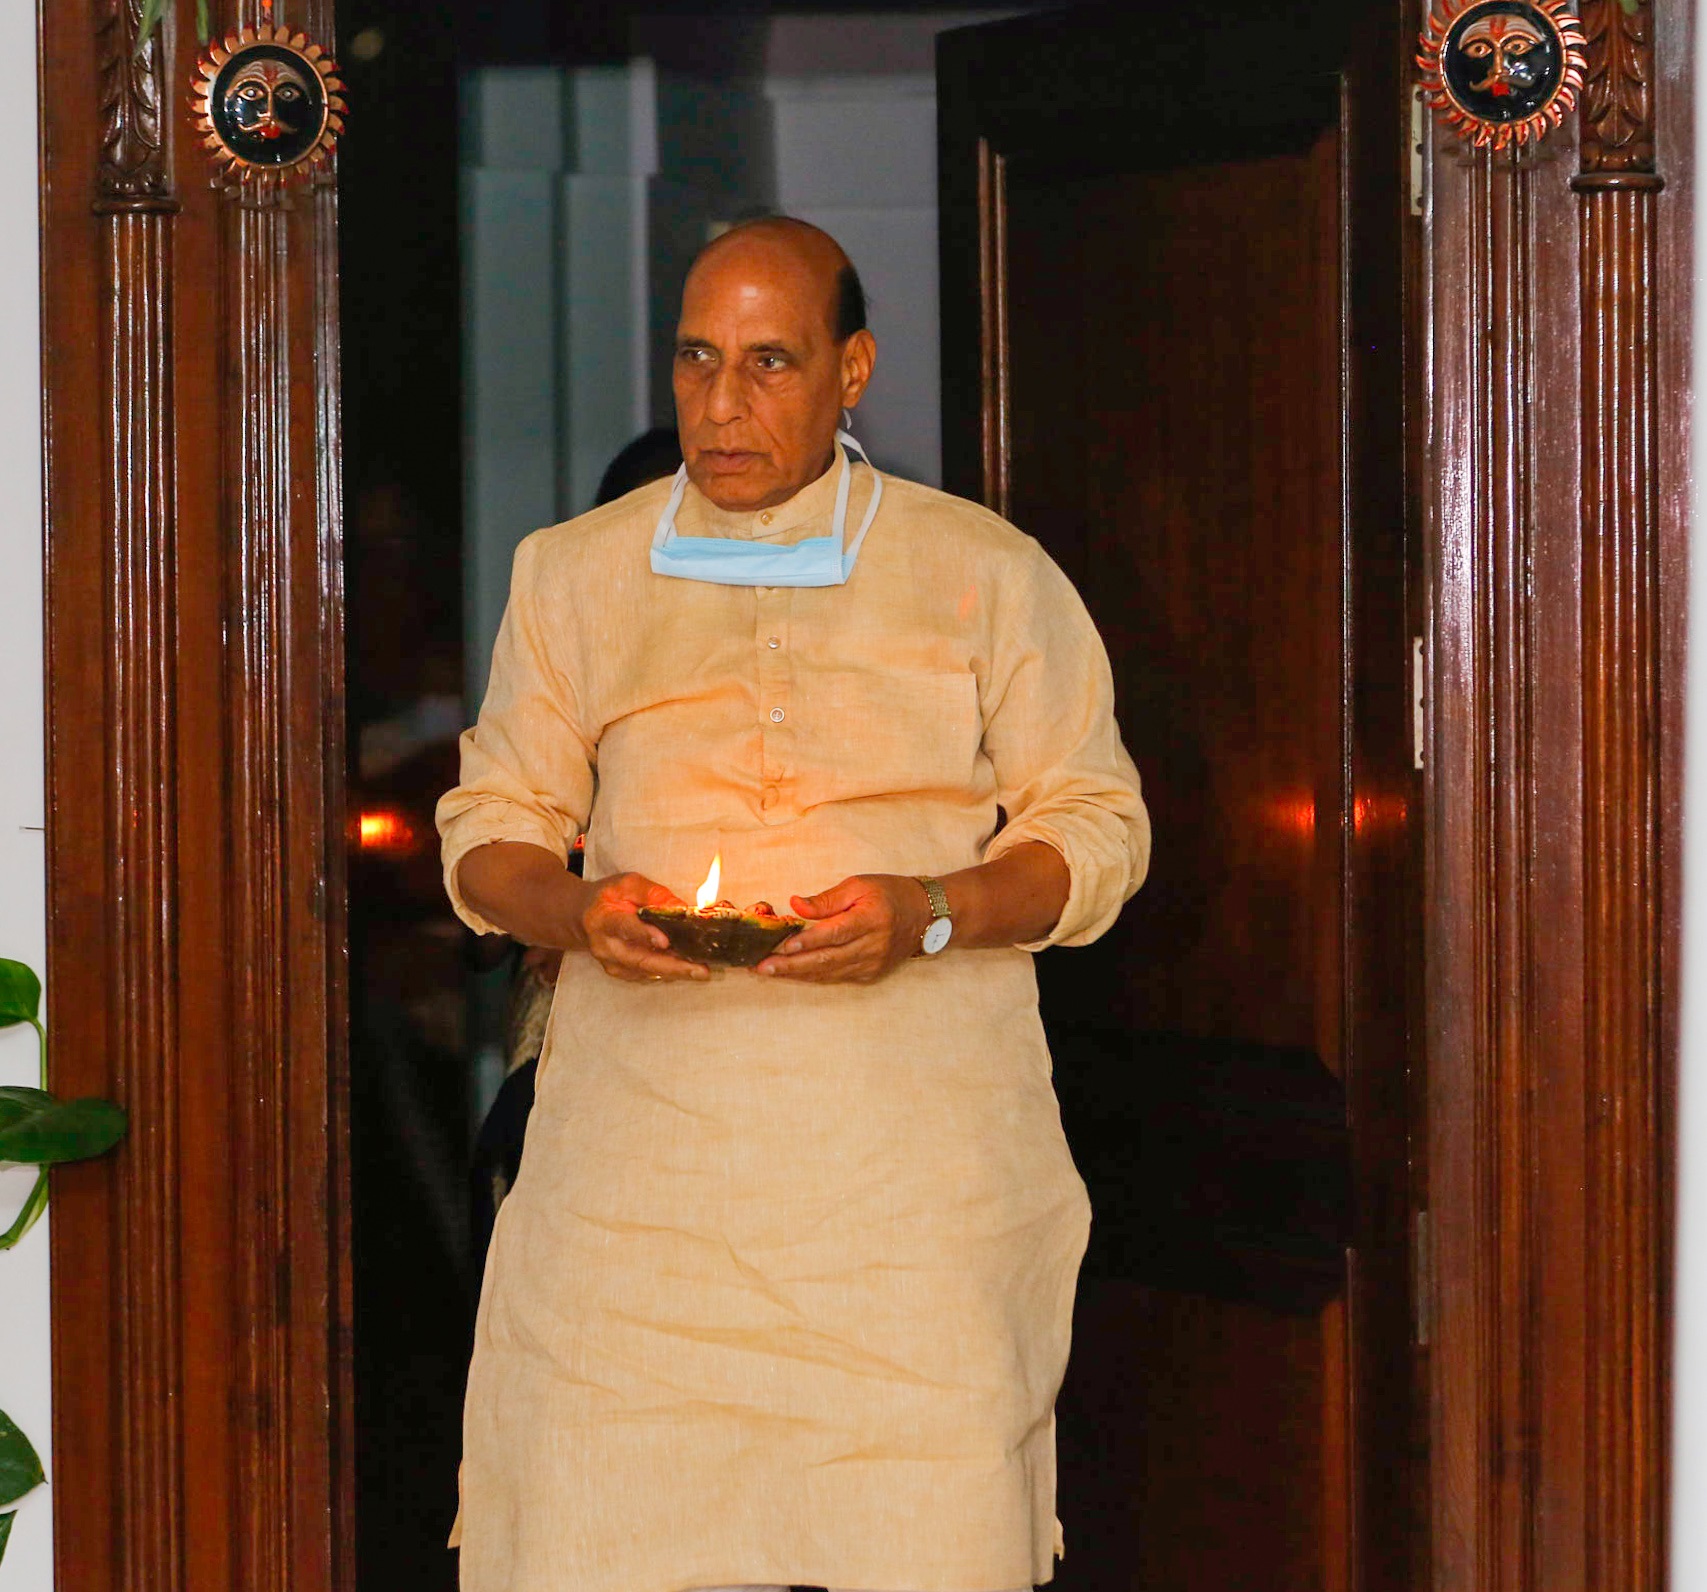 Raksha Mantri Shri Rajnath Singh joins the nation by lighting lamps for nine minutes at 09:00 PM expressing his solidarity to fight COVID-19, on a call given by Prime Minister Shri Narendra Modi, in New Delhi on Sunday, April 05, 2020